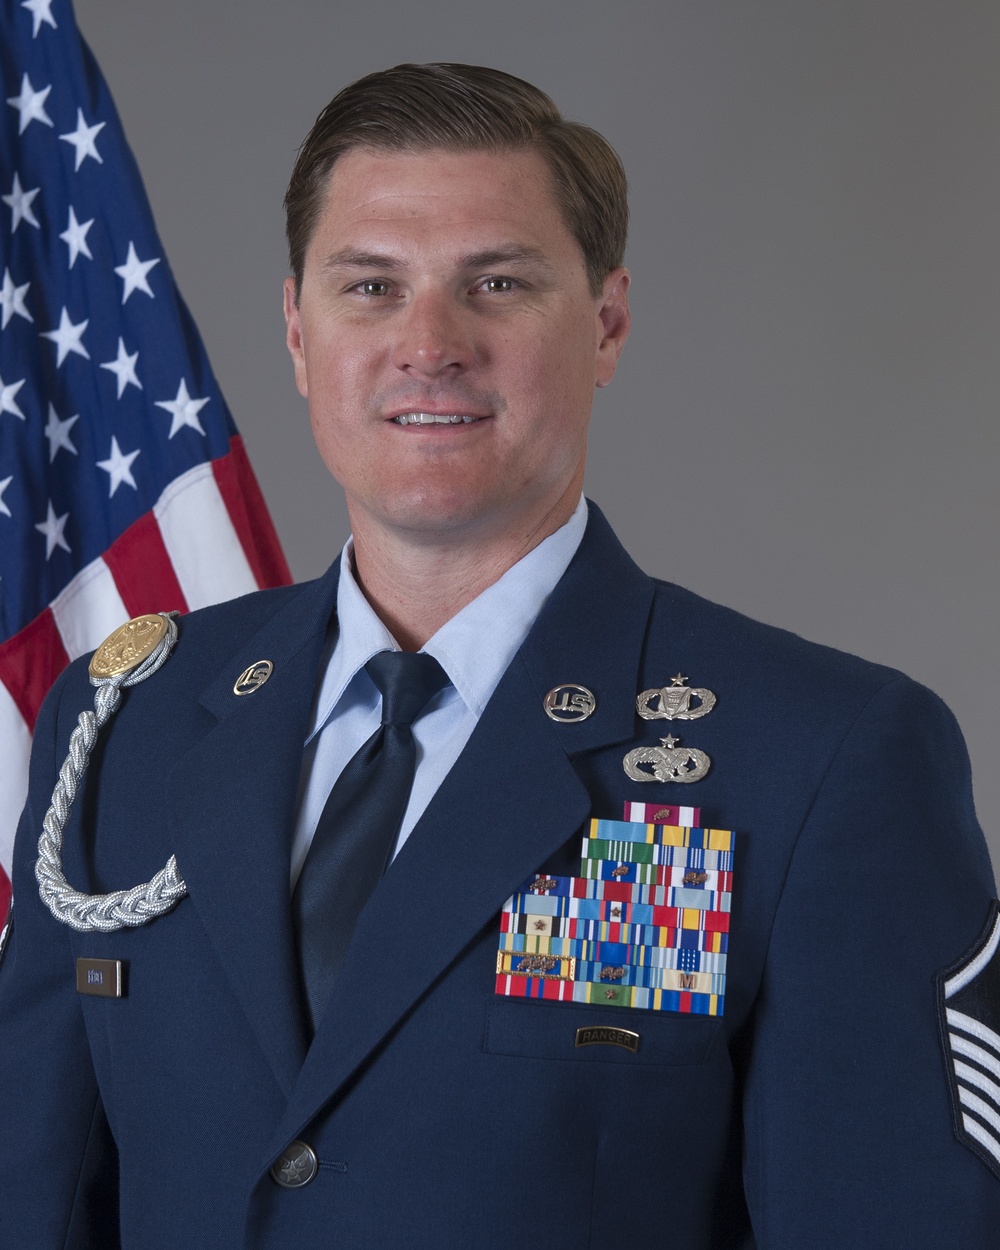 MSgt. Douglas K. Brock is ANG’s Outstanding SNCO of 2020, one of Air Force 12 Outstanding